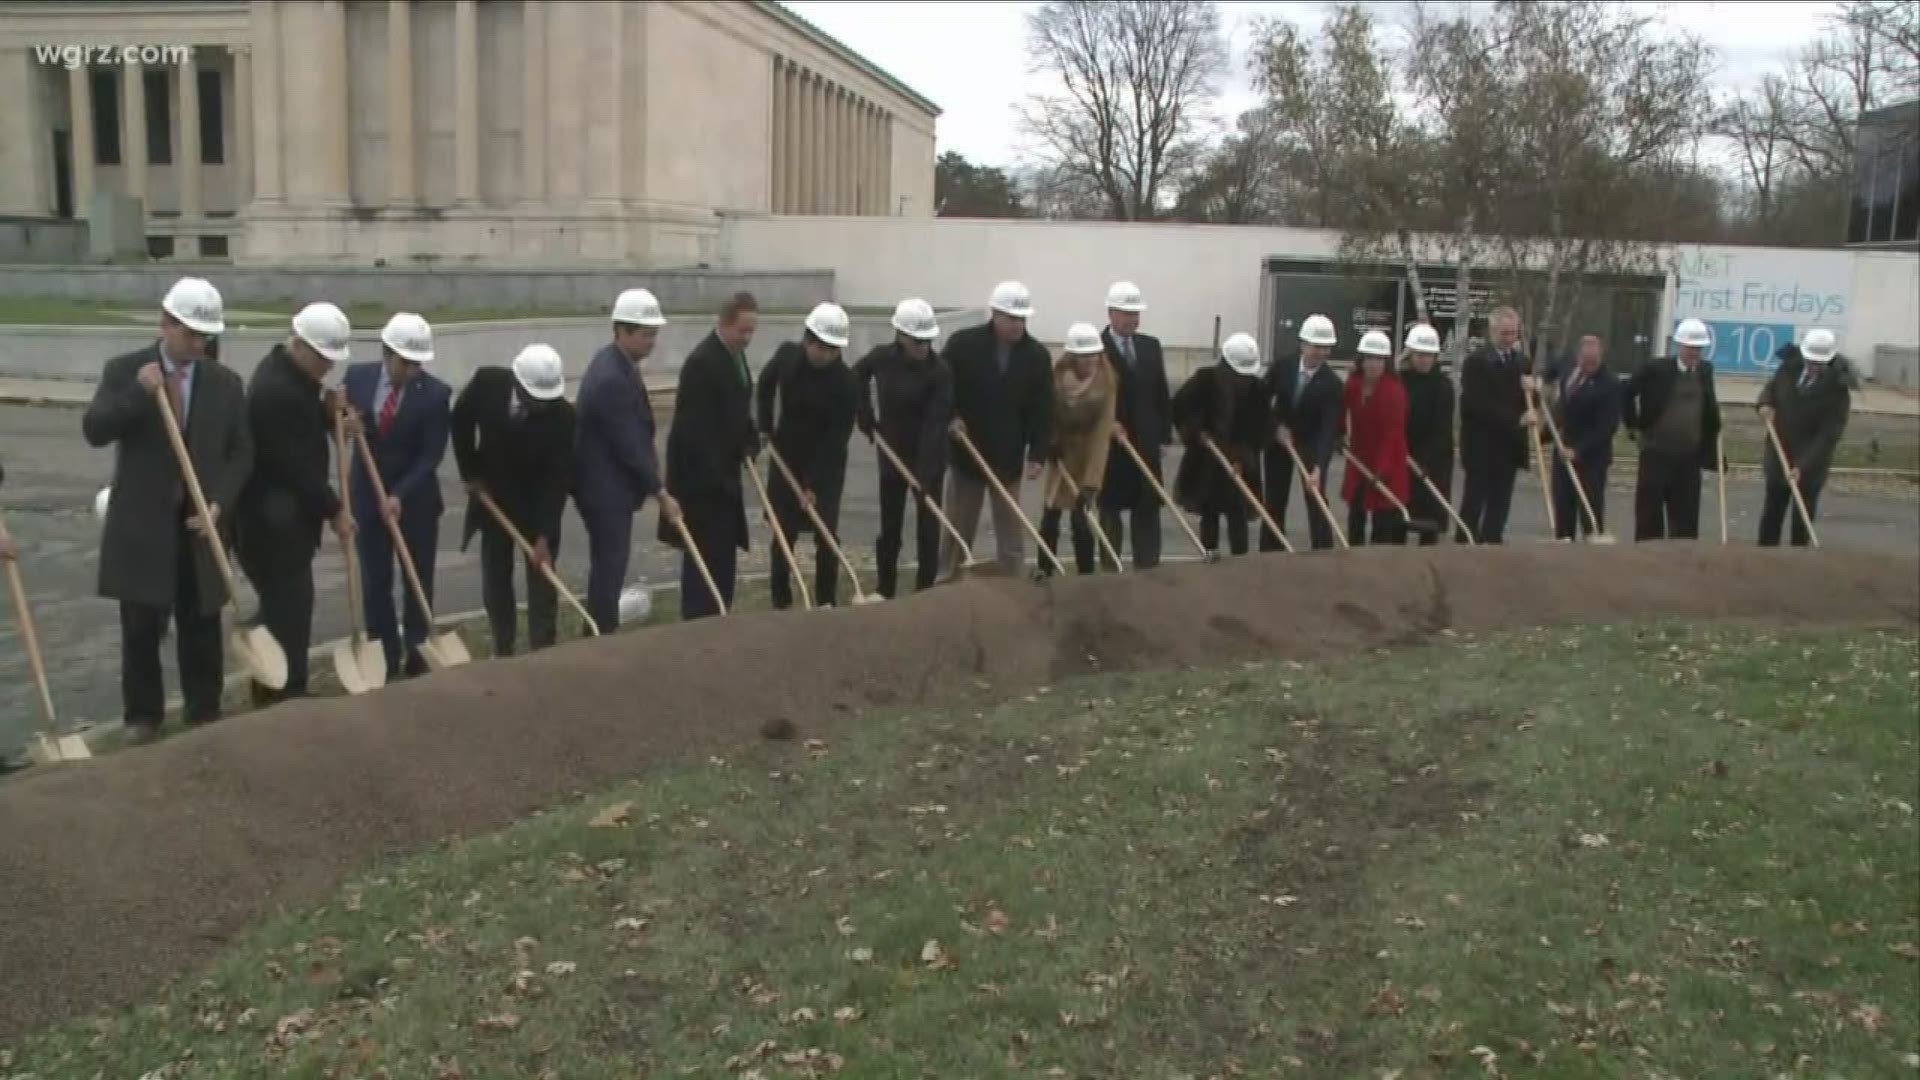 work is officially getting underway today... to expand the world-renowned Albright Knox Art Gallery in Buffalo.